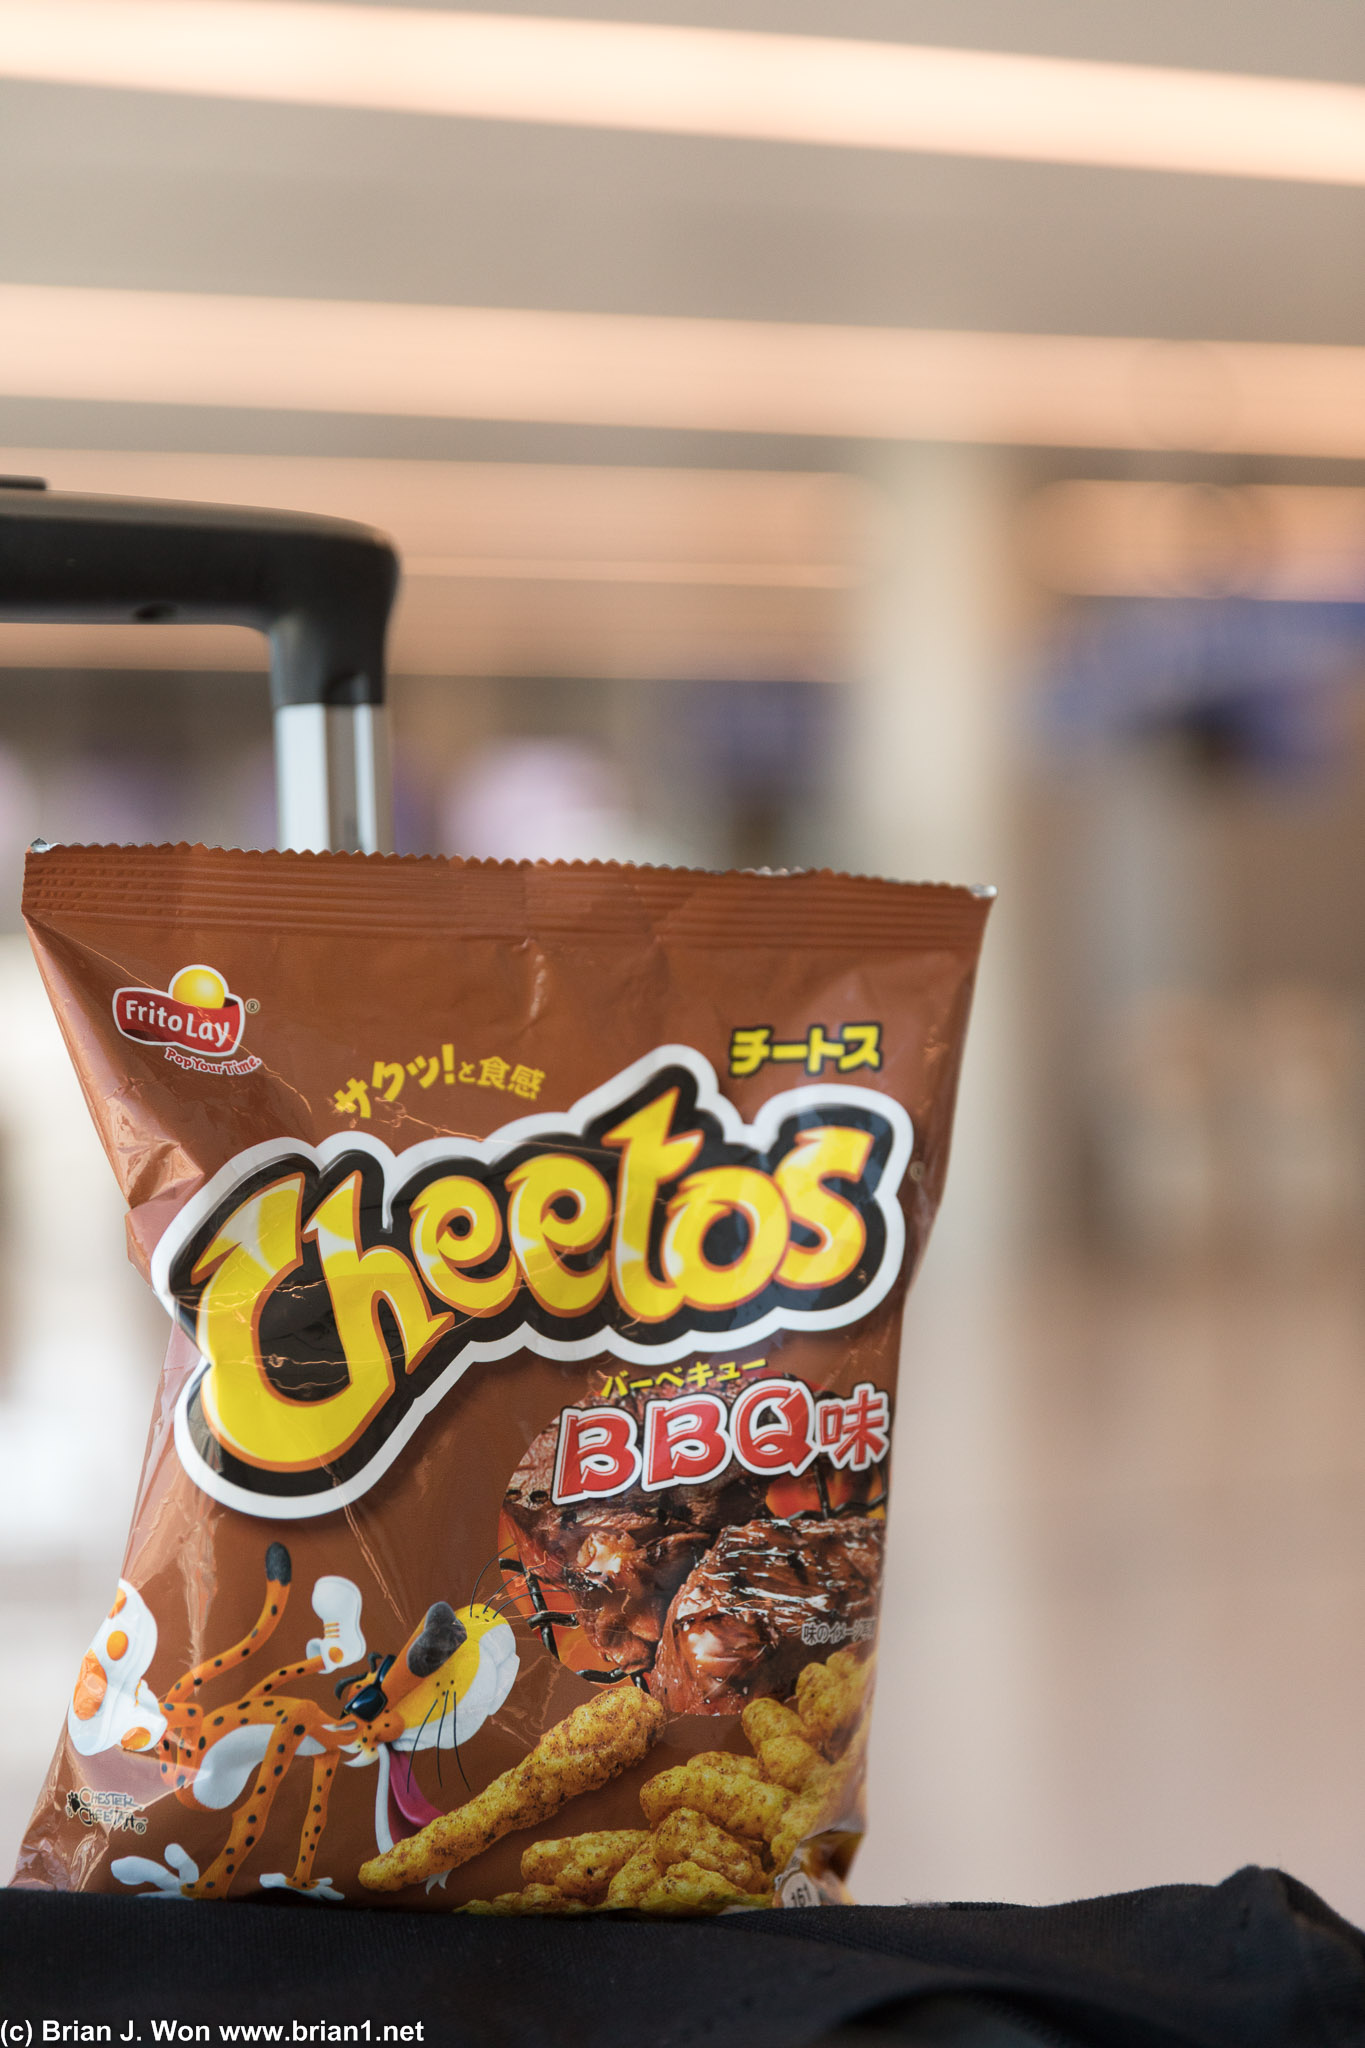 "Excuse me, are those barbeque Cheetos?"